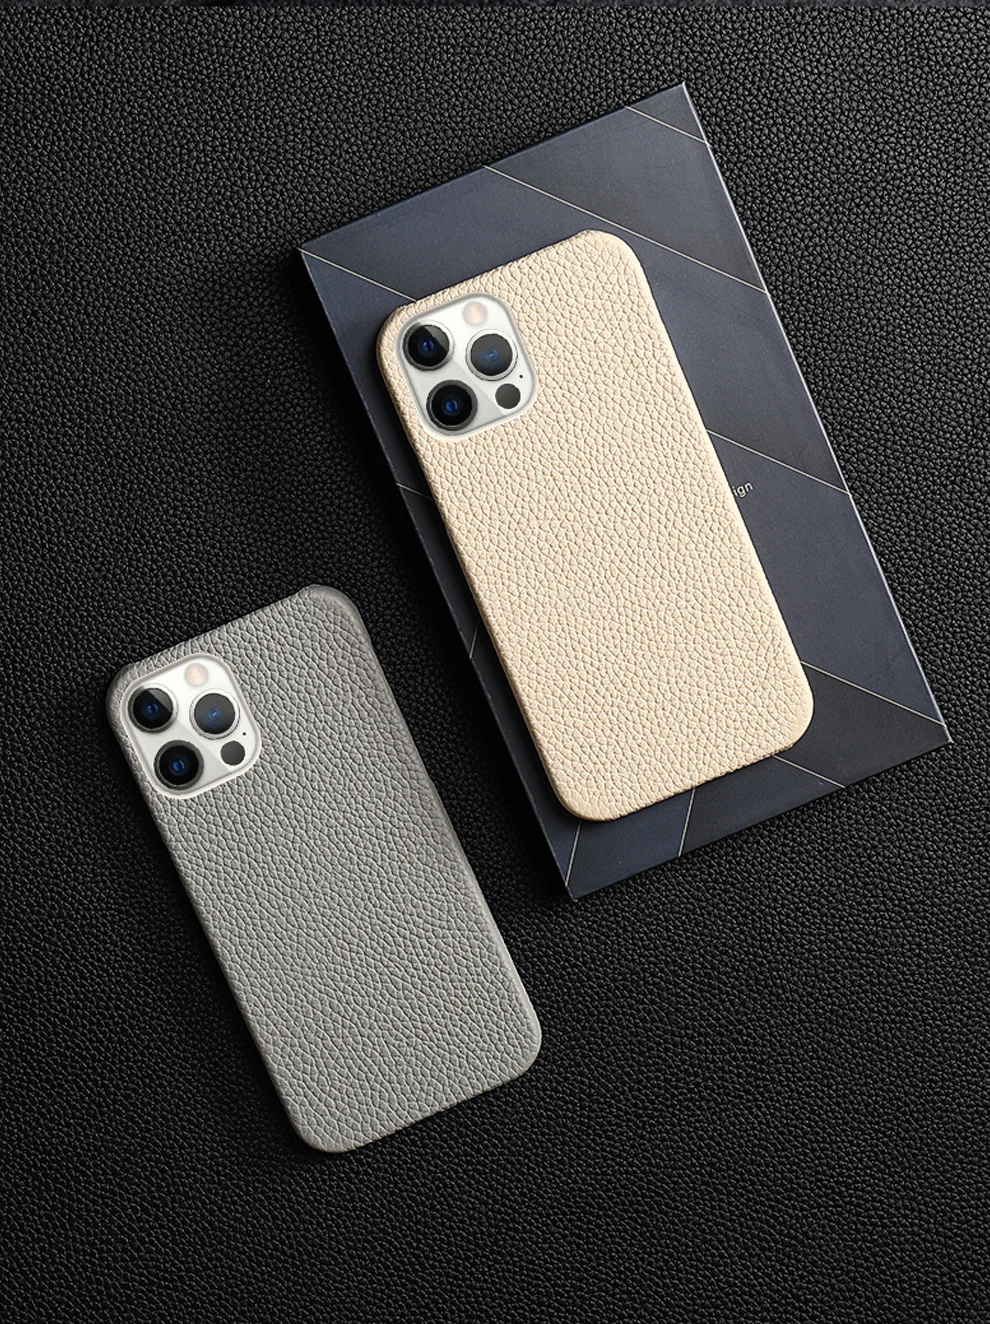 New Genuine Leather Phone case for iphone 13 Pro Max 12 13 mini Luxury back cover for iphone 12 pro max iphone11pro max cases cute iphone 13 mini case